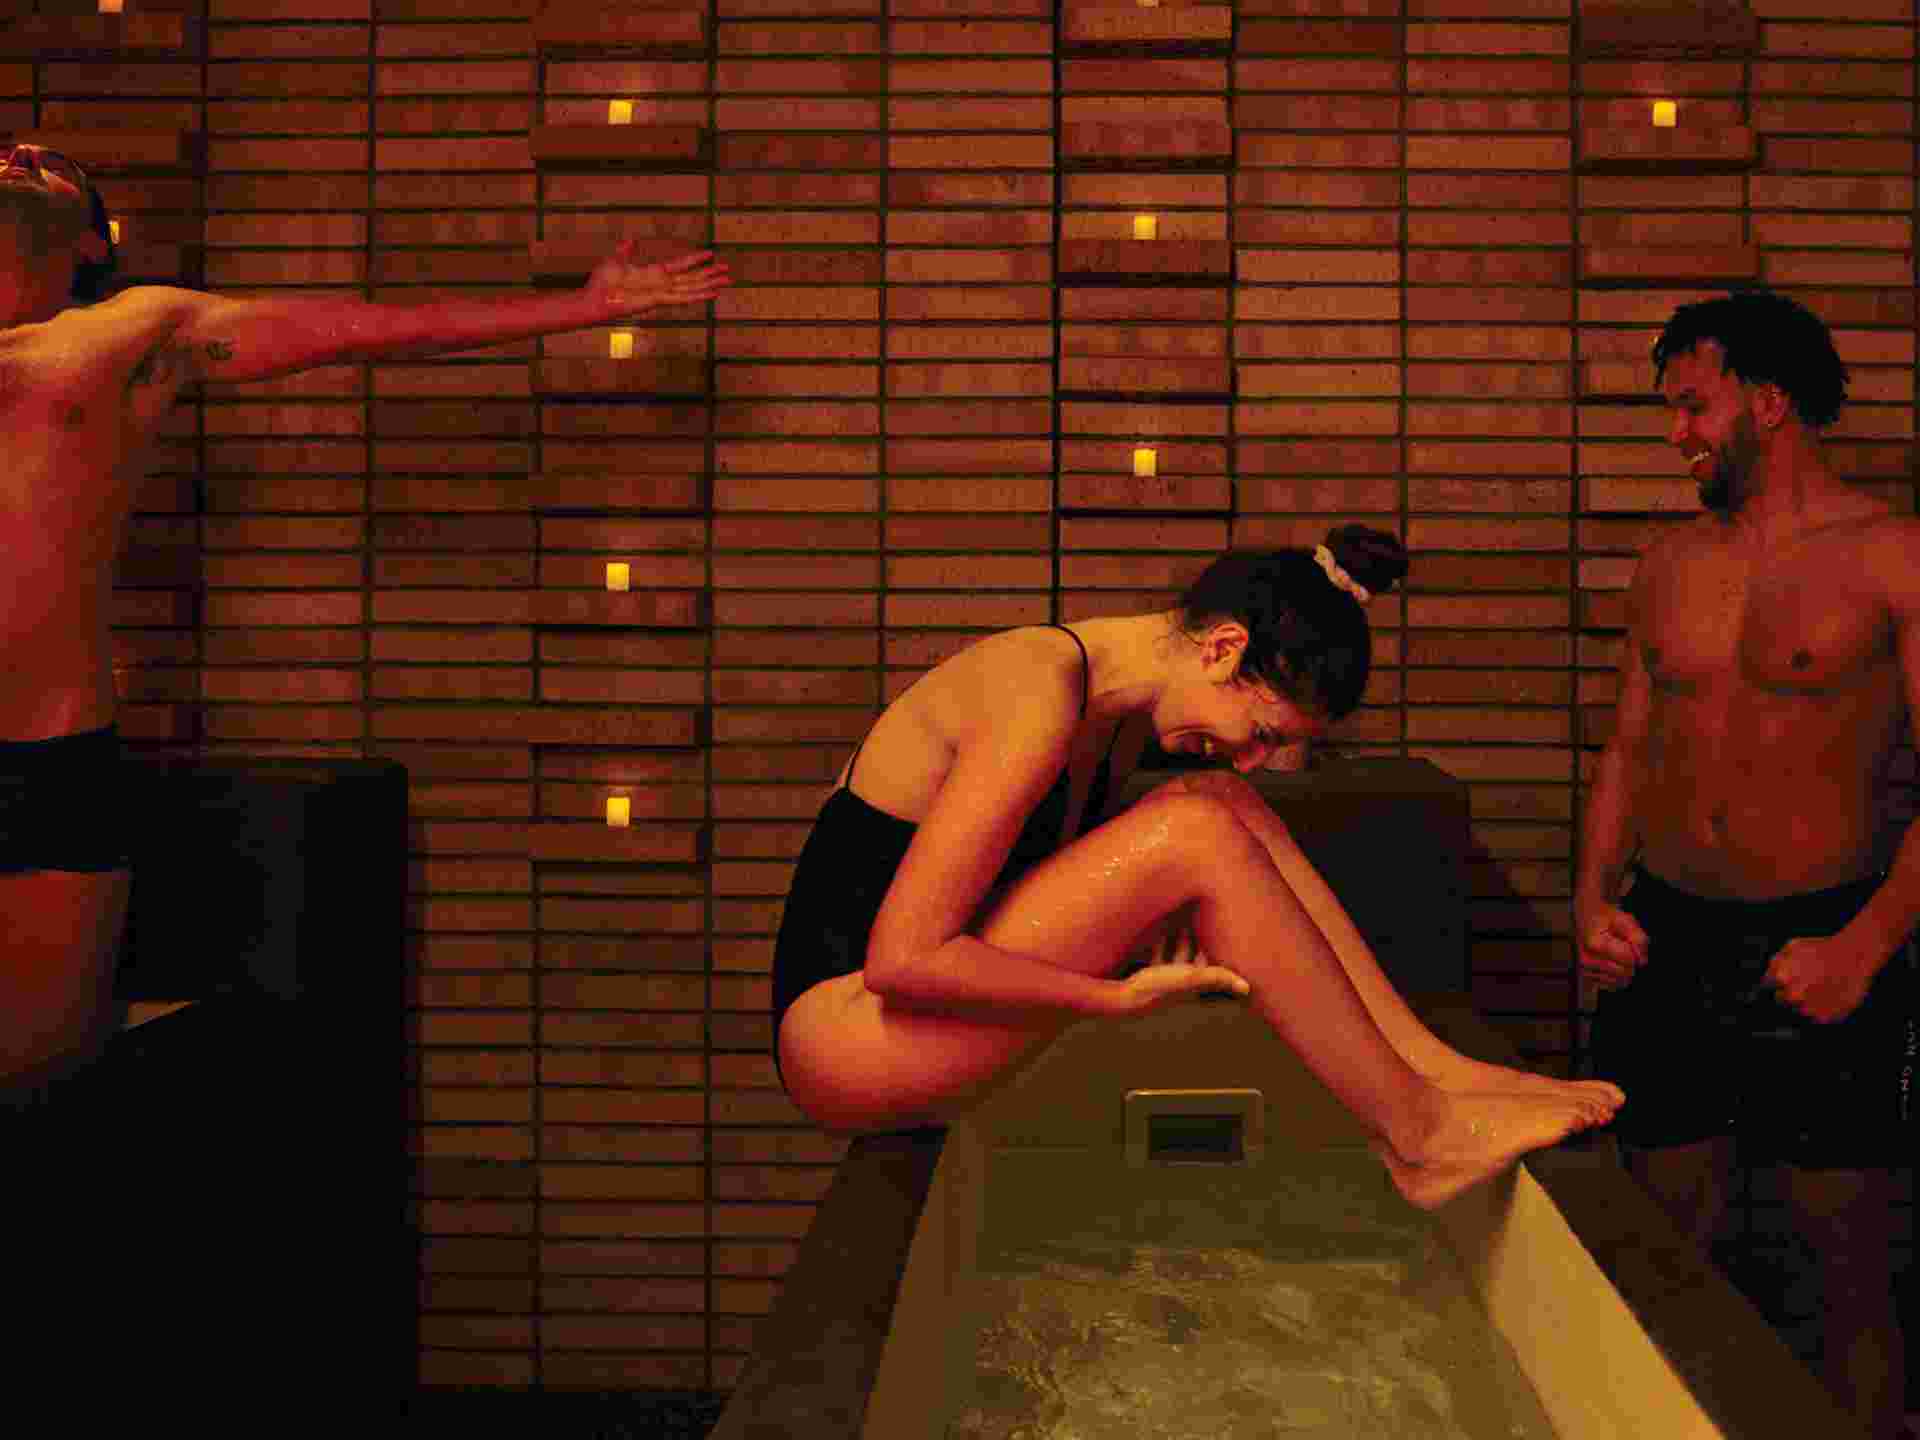 two men and a woman hanging out in the spa, enjoying themselves